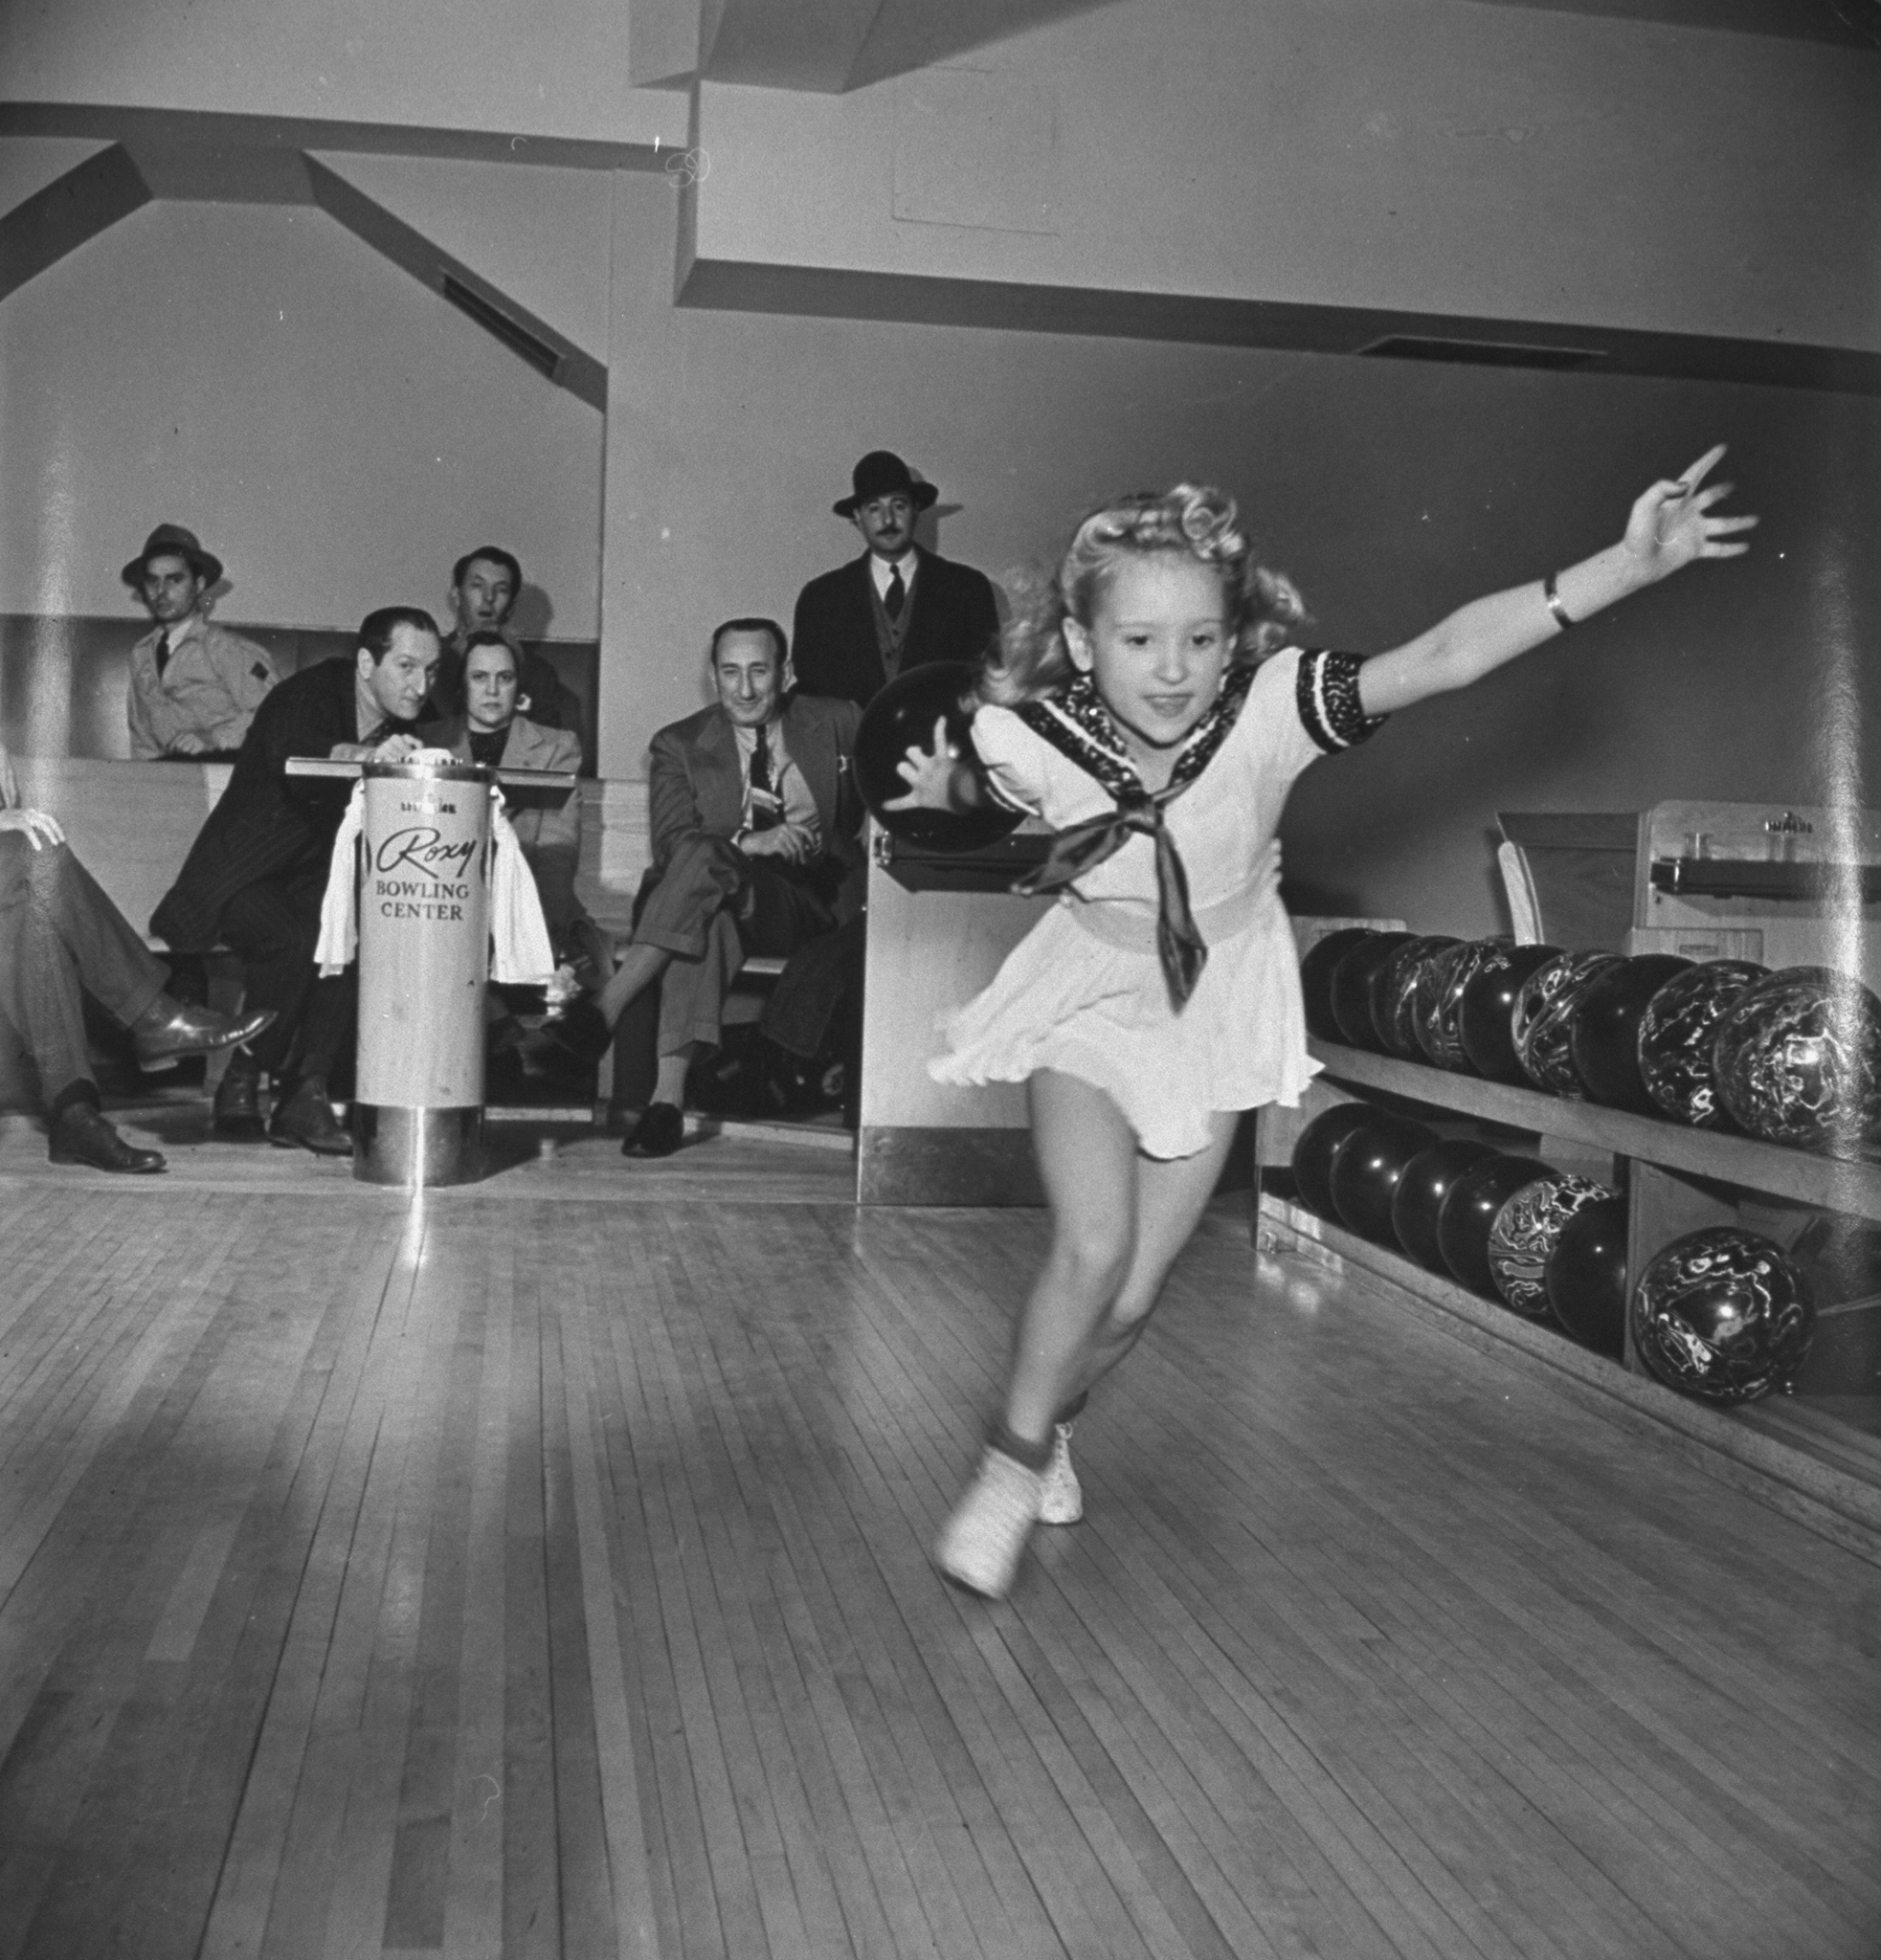 Twinkle Watts, a child bowler and ice skater, is pictured mid-stride